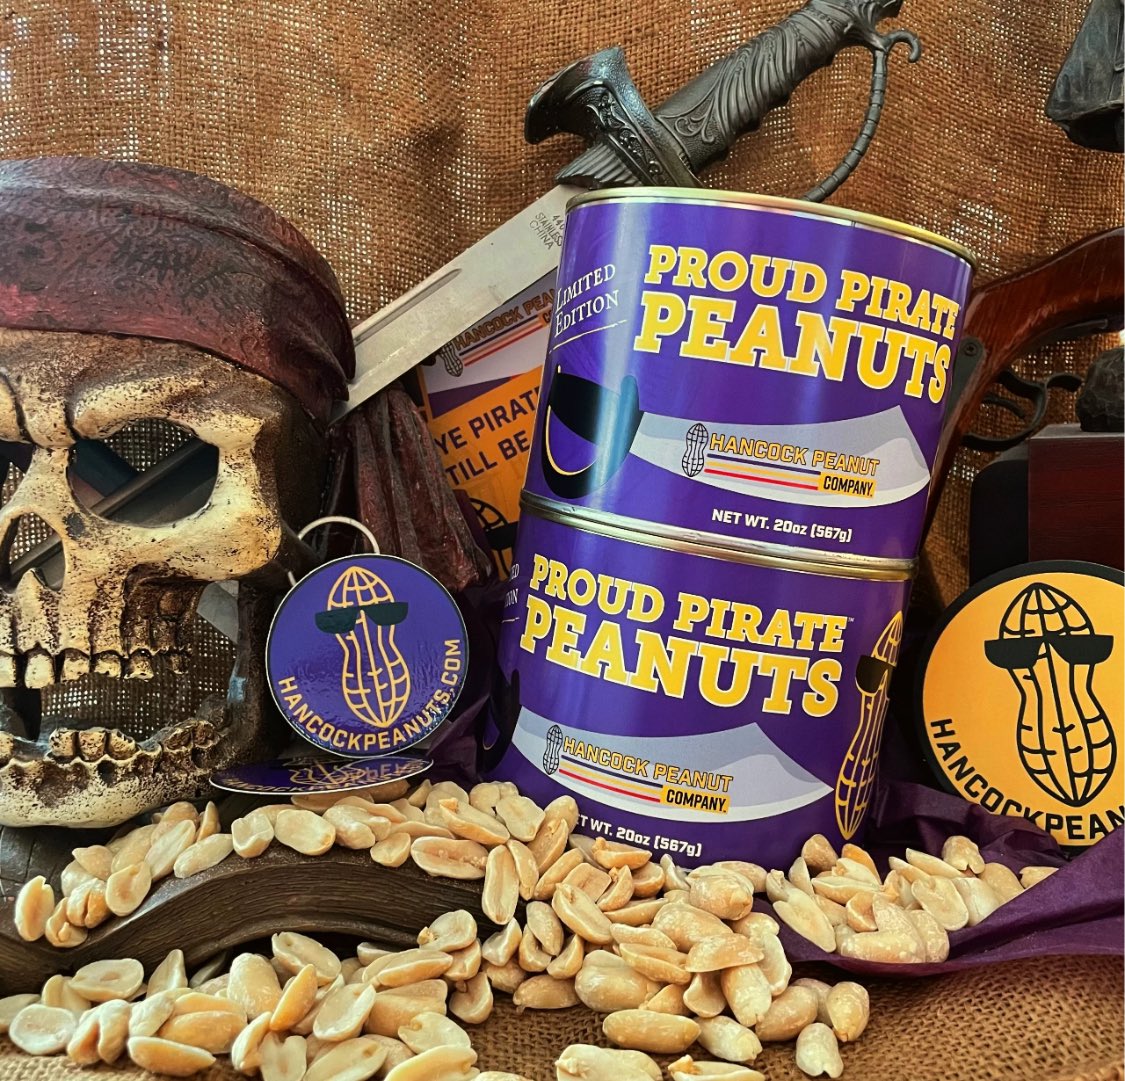 Proud Pirate™️Peanuts are available now! 🥜 Only 250 cans exist! ☠️ A portion of proceeds go to the East Carolina University Alumni Scholarship Fund, so stock up on this ONE TIME collectible can. ARRRGH. Visit HancockPeanuts.com/pirates to get yours. @EastCarolina @piratealumni